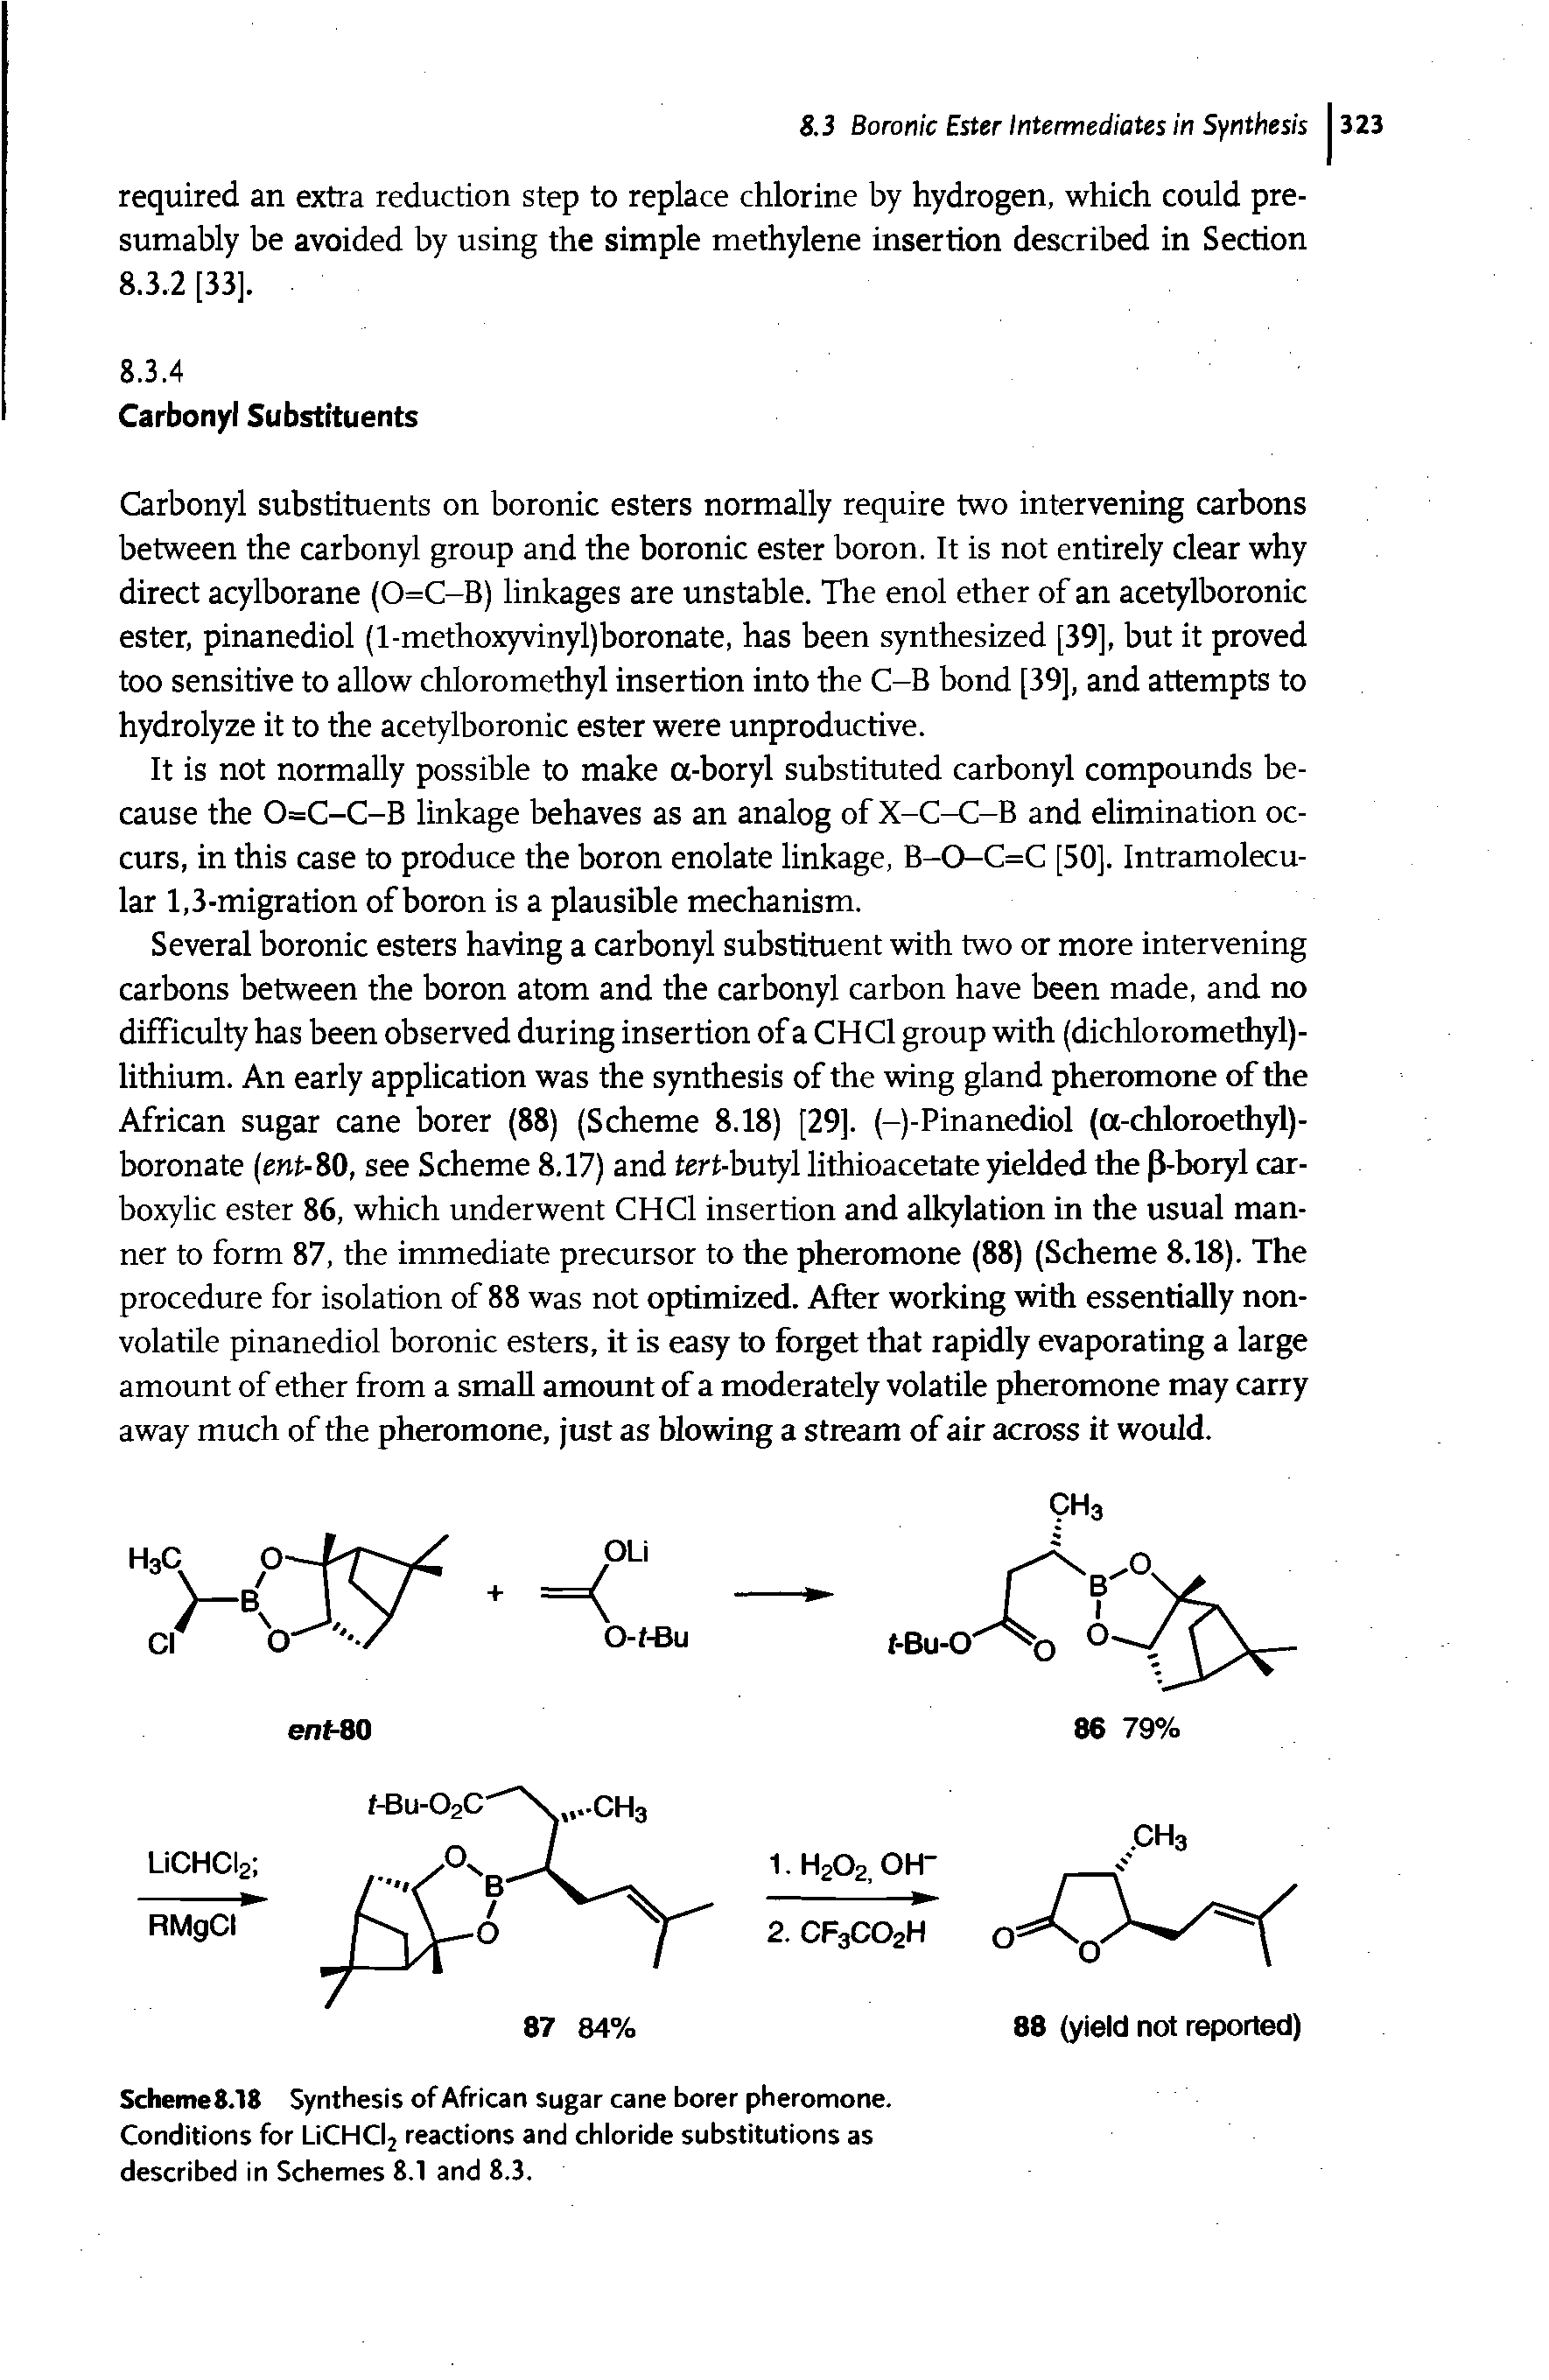 Scheme8.18 Synthesis of African sugar cane borer pheromone. Conditions for LiCHCh reactions and chloride substitutions as described in Schemes 8.1 and 8.3.